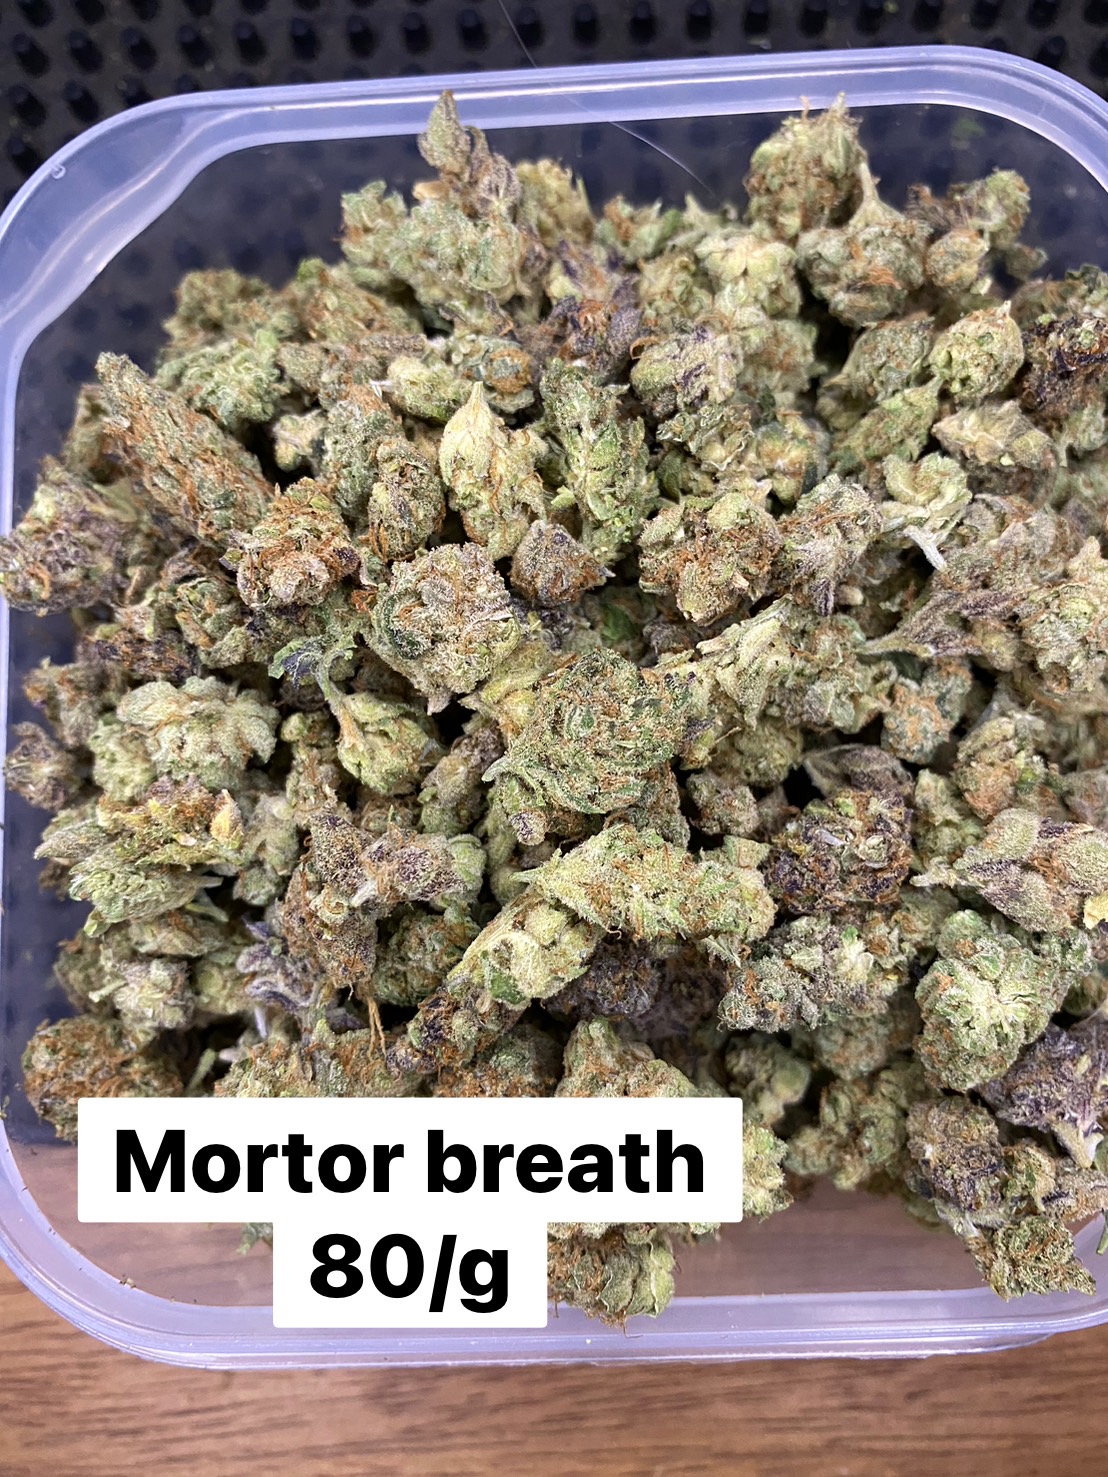 Product Image for Mortor breath